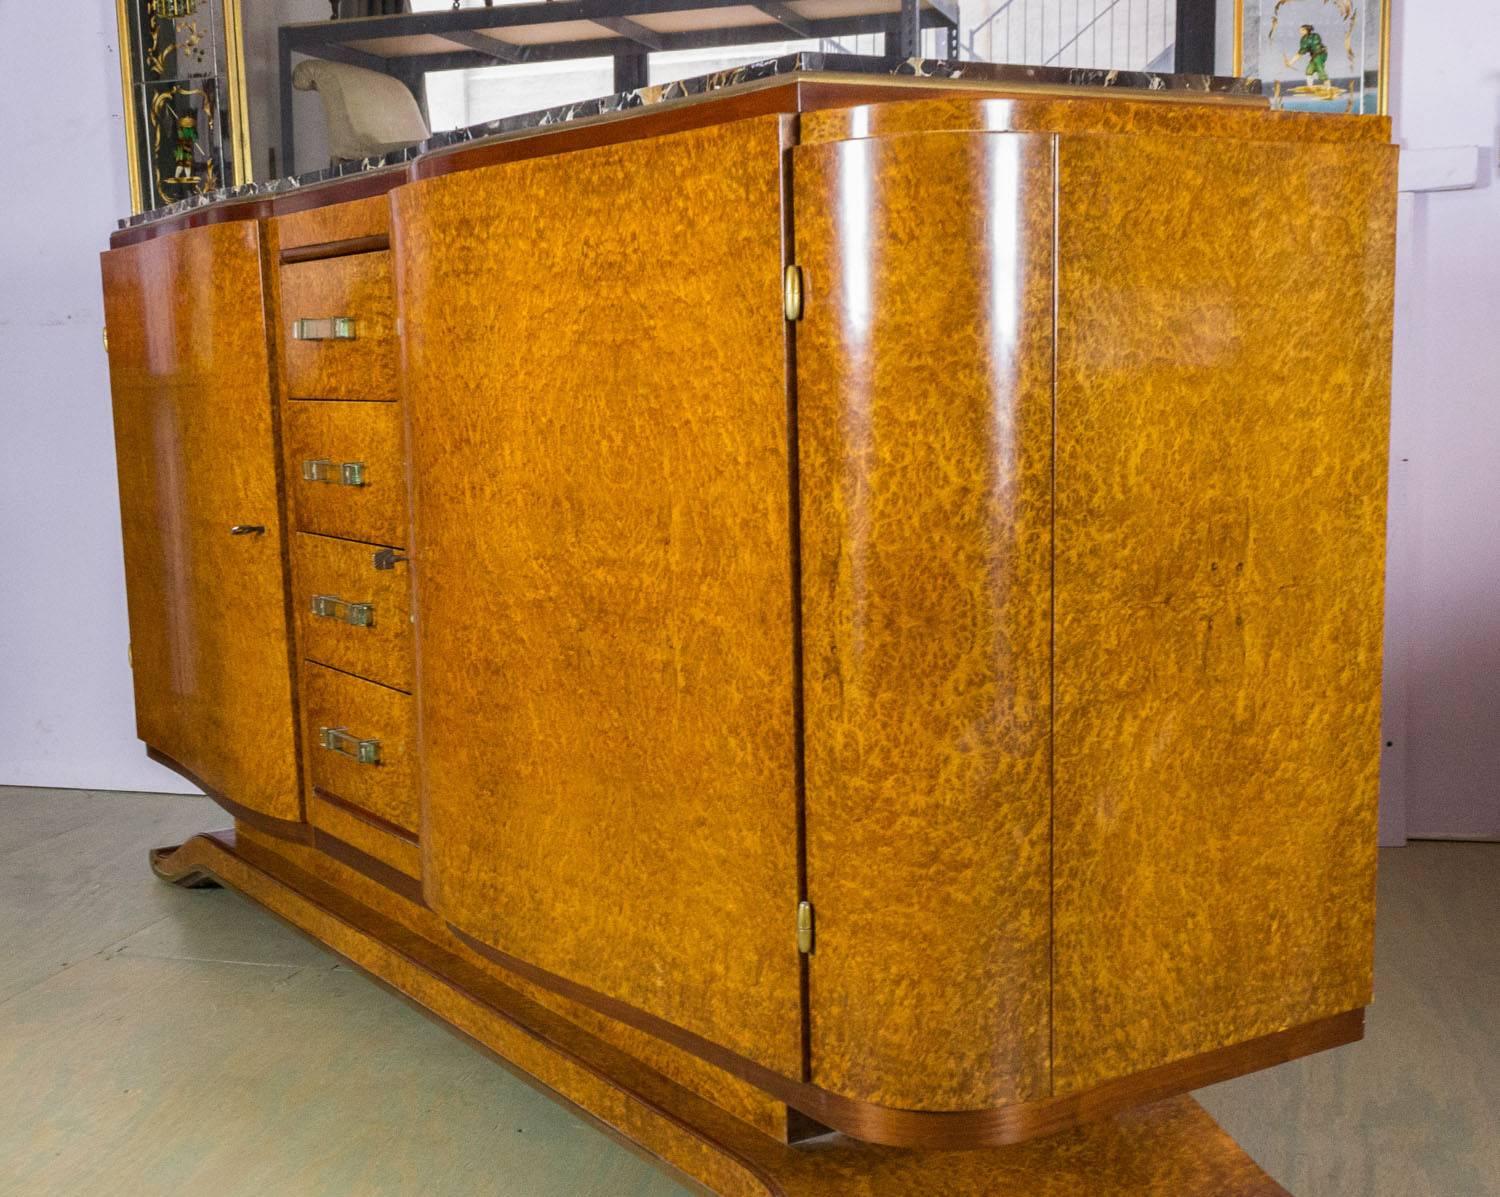 French Art Deco style elm burl sideboard with original black and gold marble. Brass trim around the inset marble and also along the base of the sideboard. The drawer's pulls are original glass. The price includes having new shelves made.

The